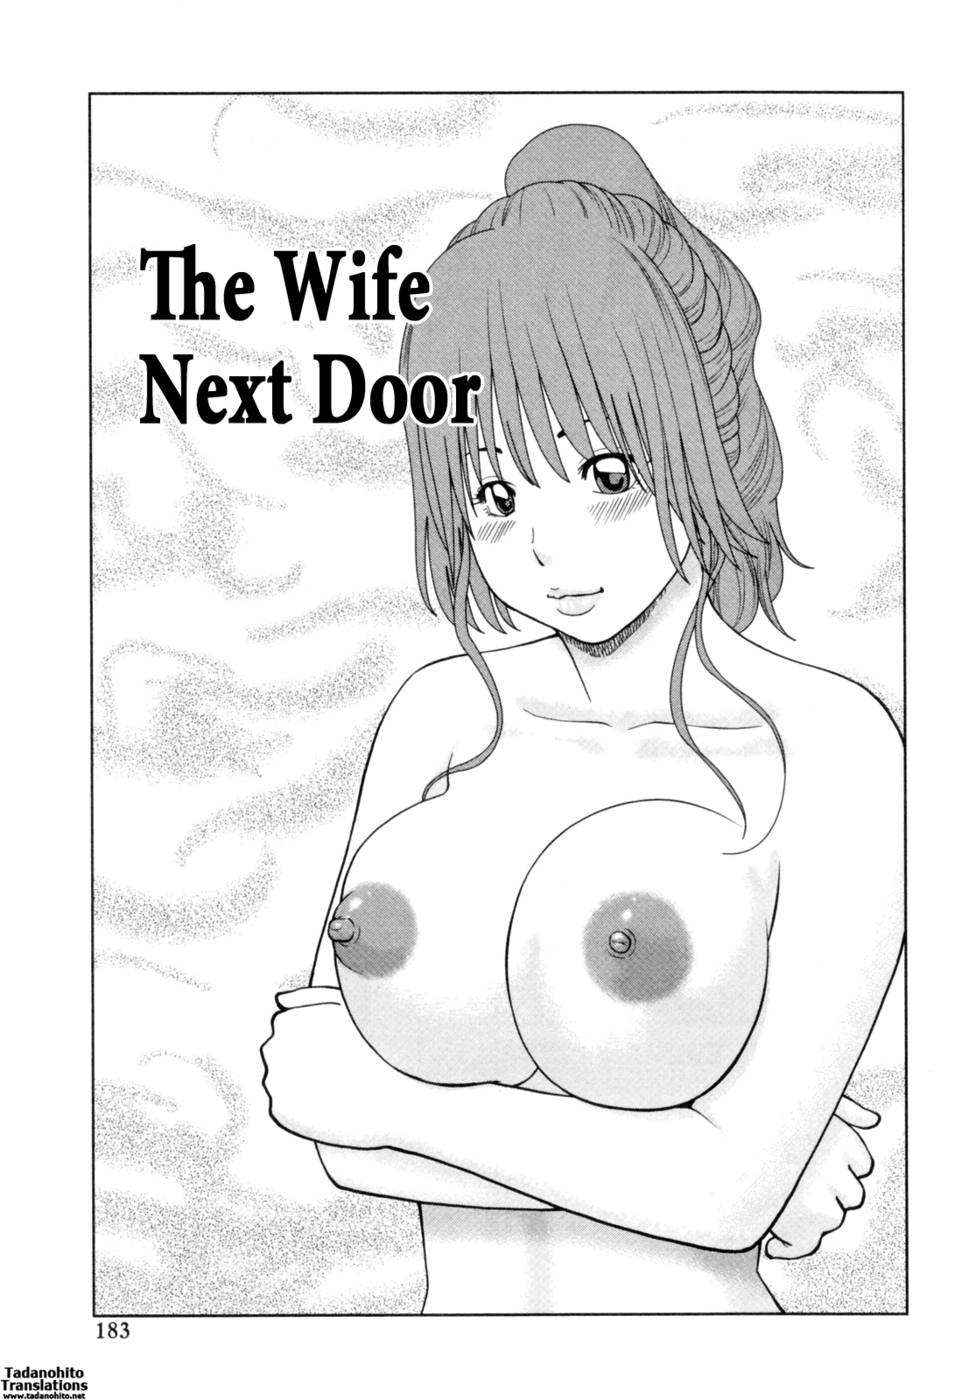 Hentai Housewife Sub Indo - 32 Year Old Unsatisfied Wife-Chapter 10-The Wife Next Door-Hentai Manga  Hentai Comic - Page: 1 - Online porn video at mobile